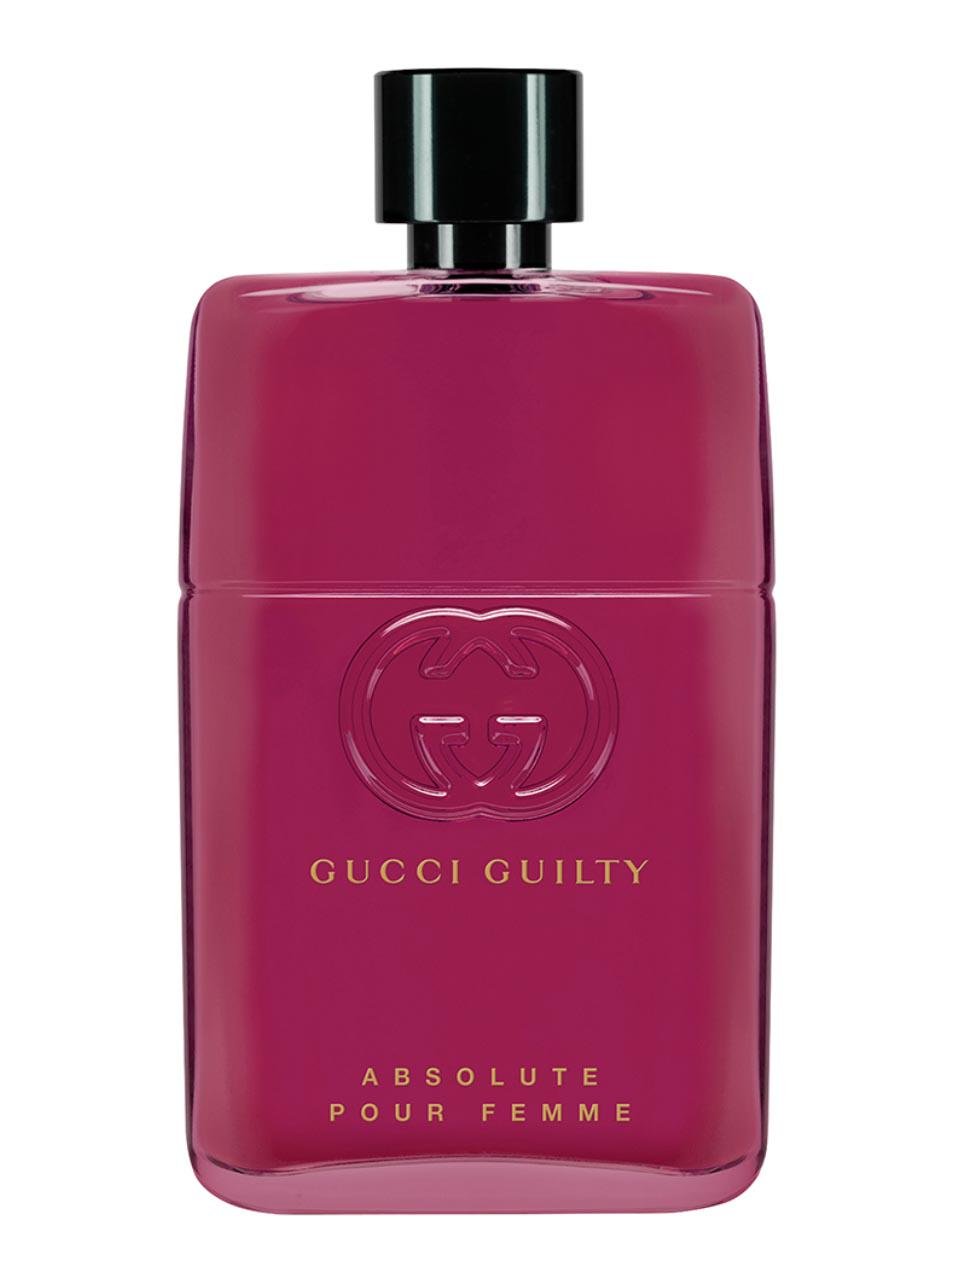 Gucci Guilty Absolute For Women EDP 90Ml - AllurebeautypkGucci Guilty Absolute For Women EDP 90Ml